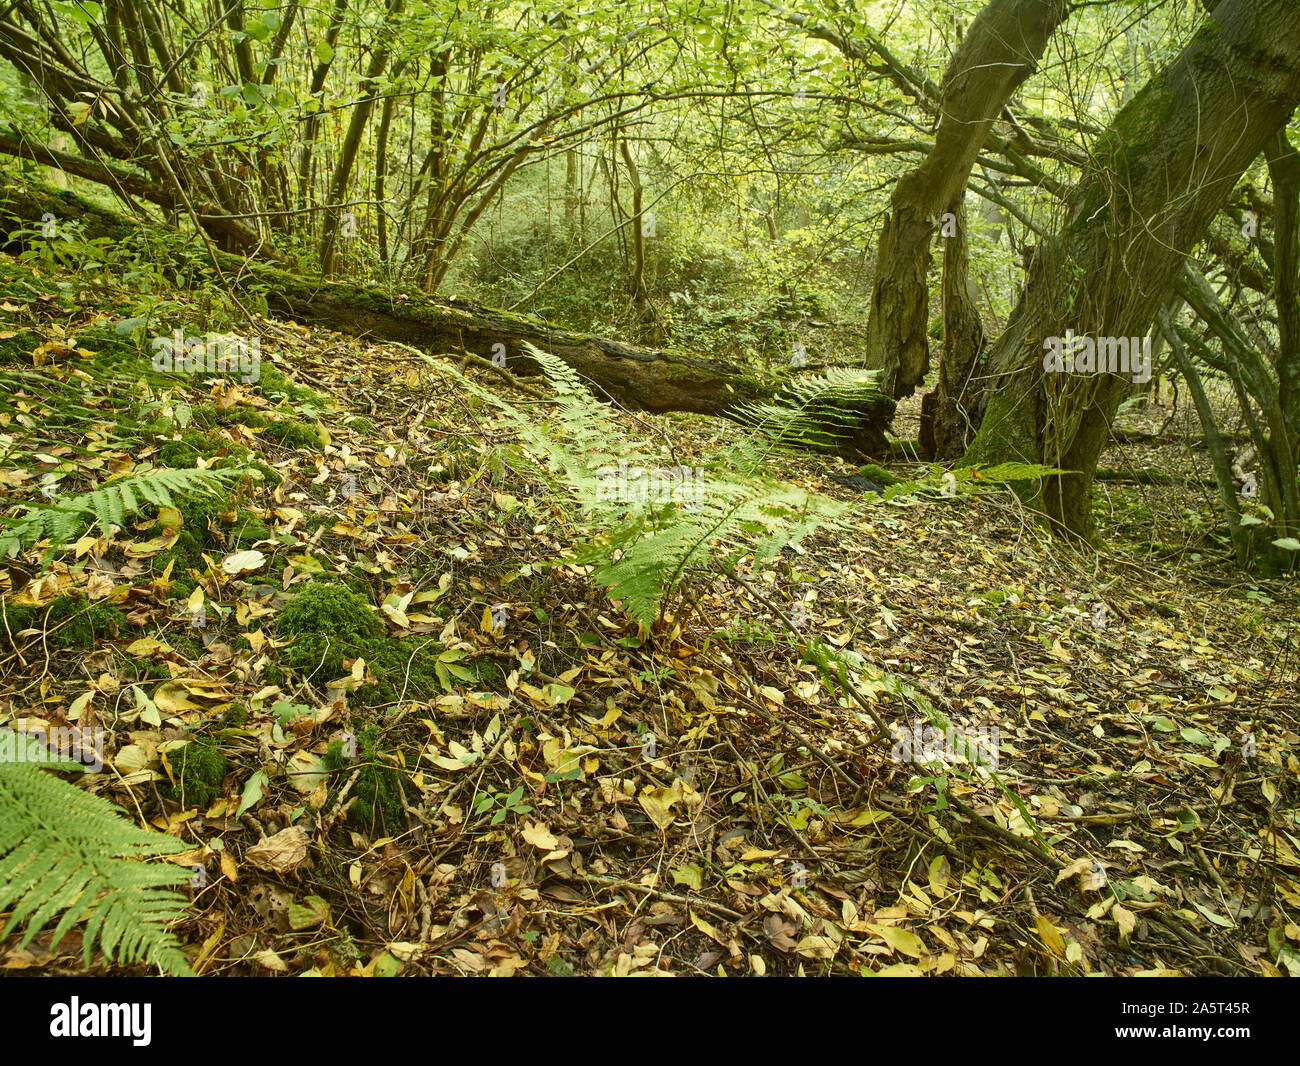 Ferns in autumn on a surrey woodland floor with fallen leaves and changing foliage, Kent, England, United Kingdom, Europe Stock Photo